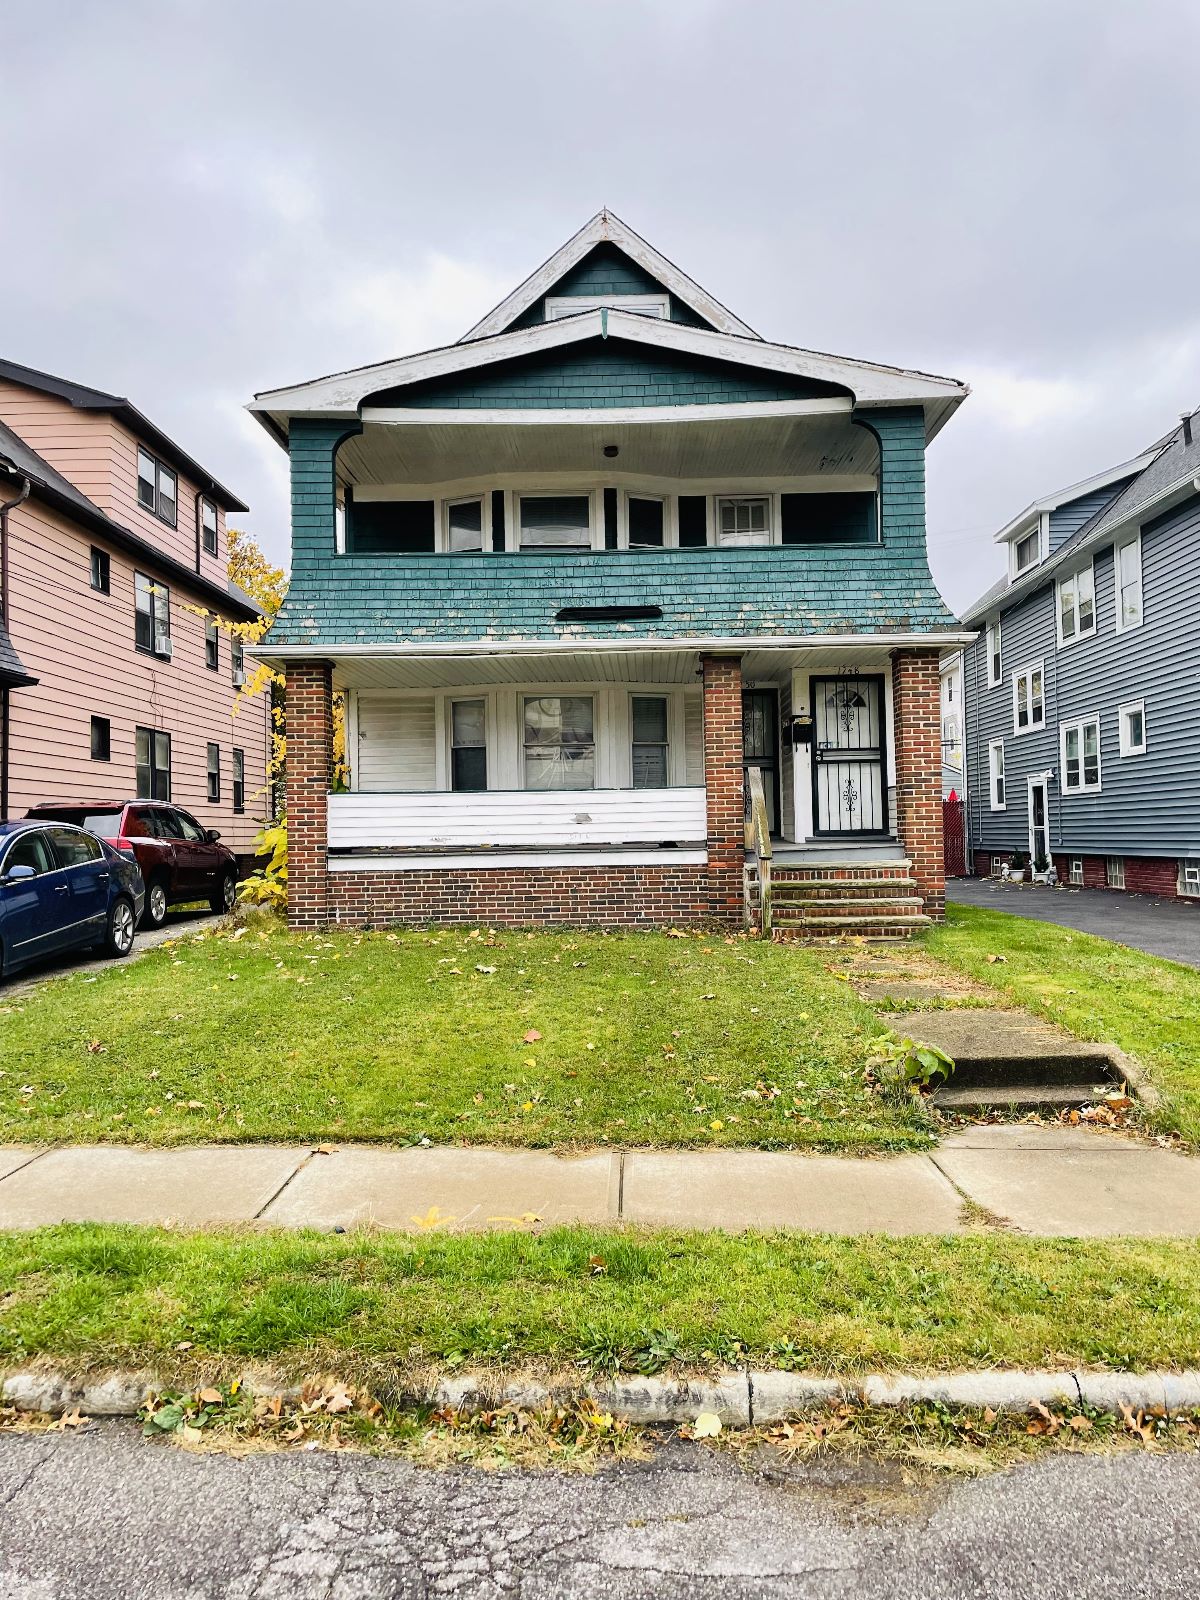 PURCHASE OF A 220m² DUPLEX IN CLEVELAND FOR $89.000-PROFIT: 10.210 = 11,47% Net